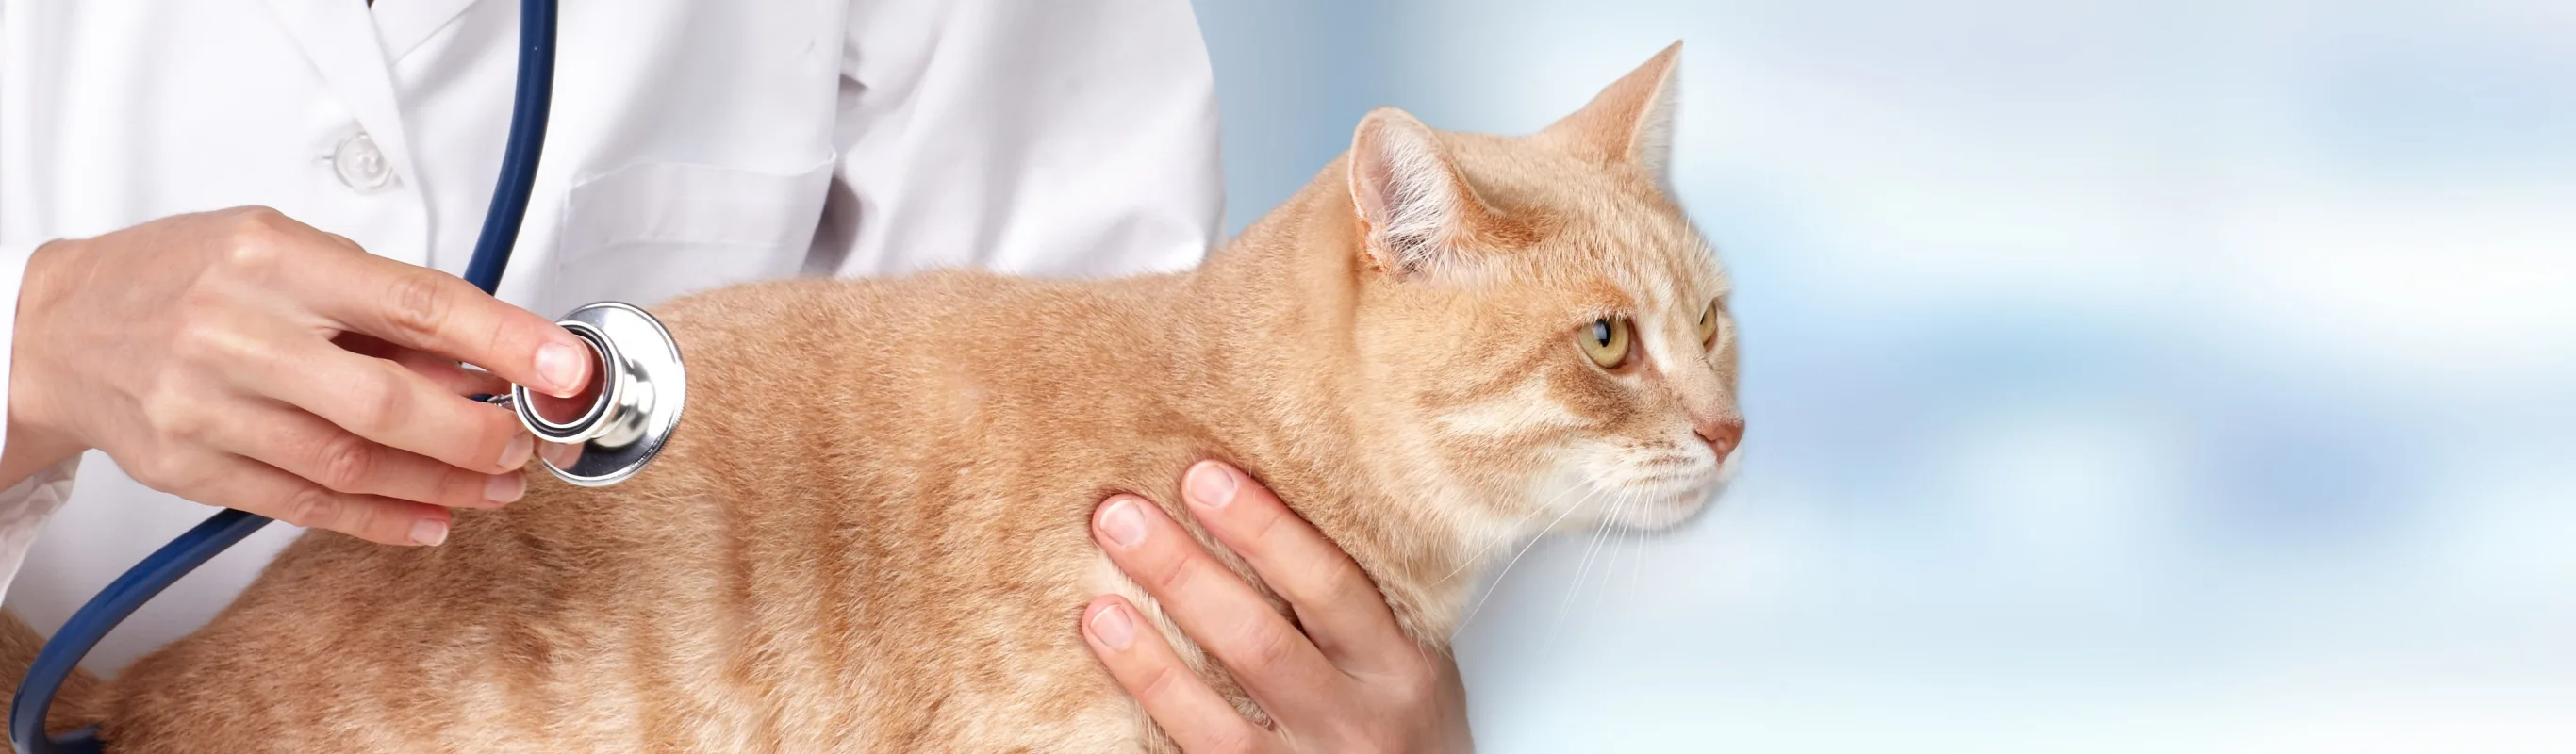 Cat being examined by vet with stethoscope